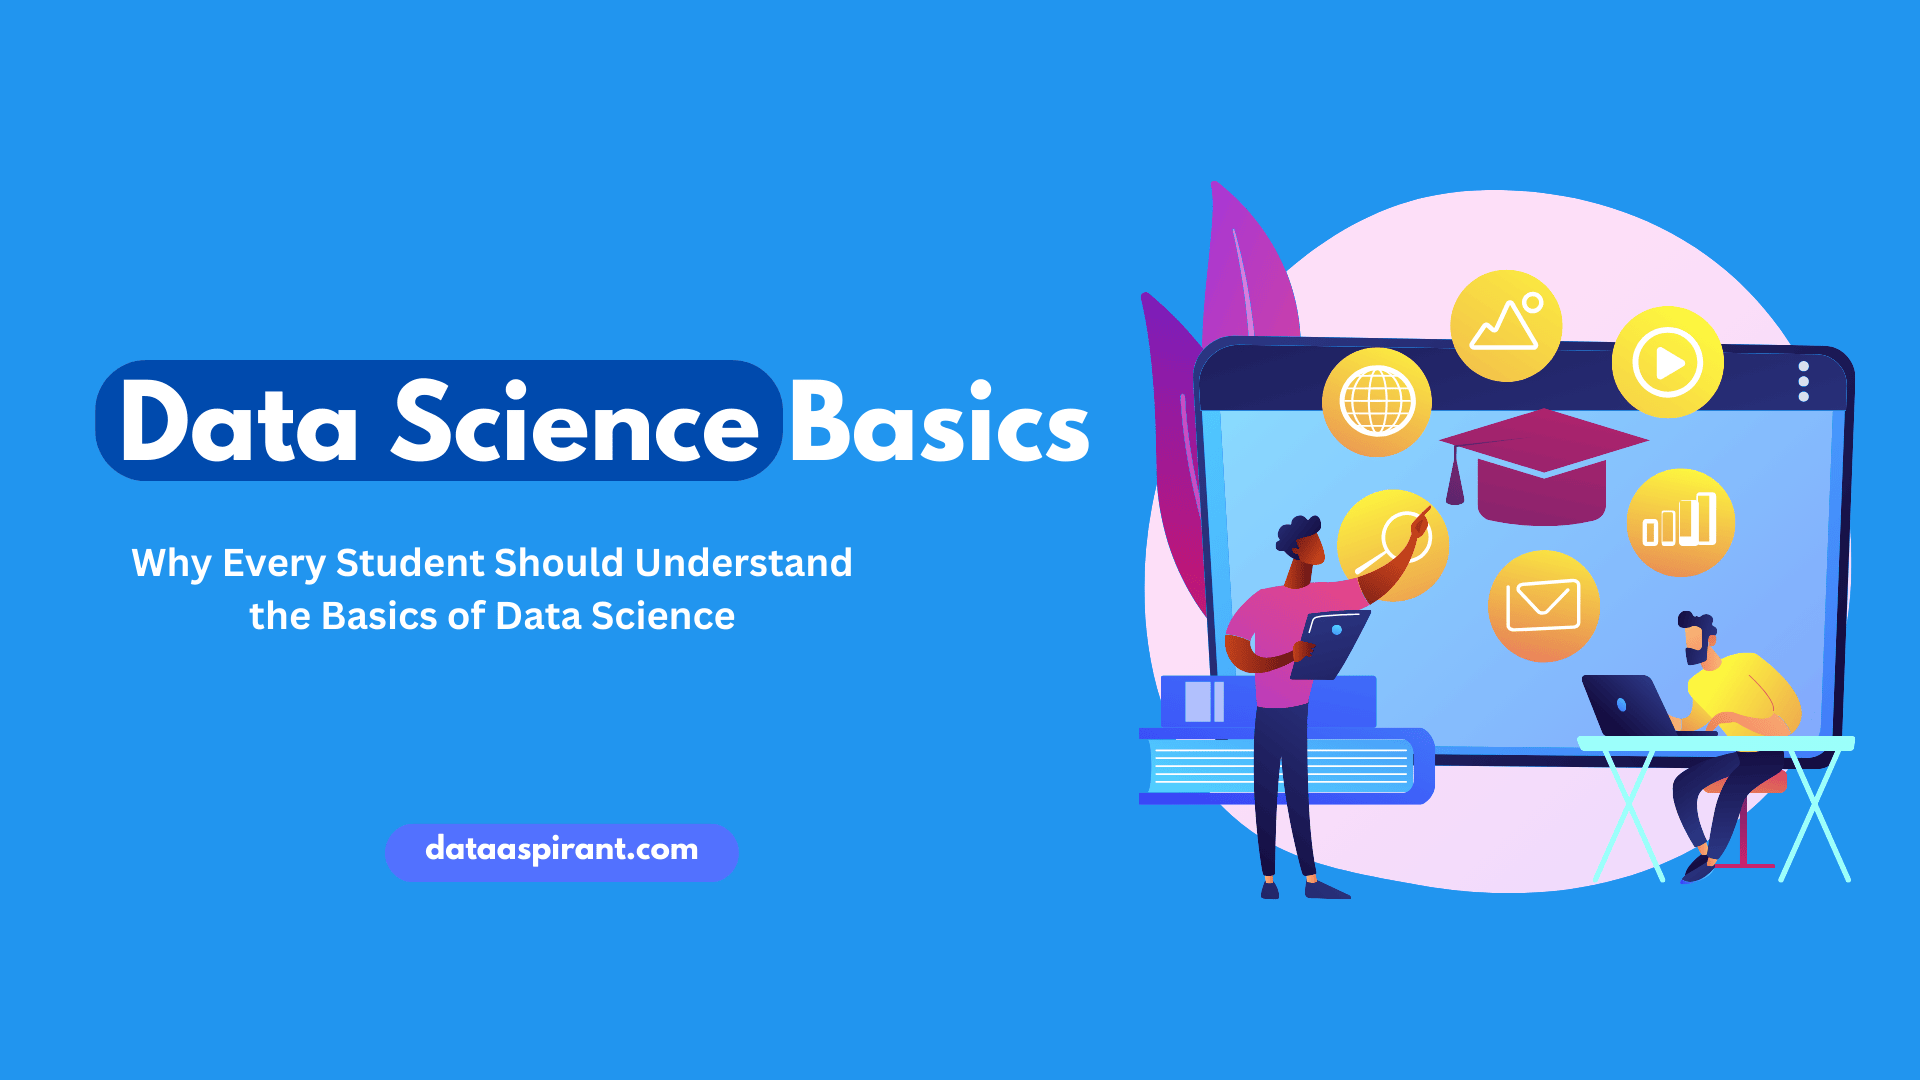 Why Every Student Should Understand the Basics of Data Science